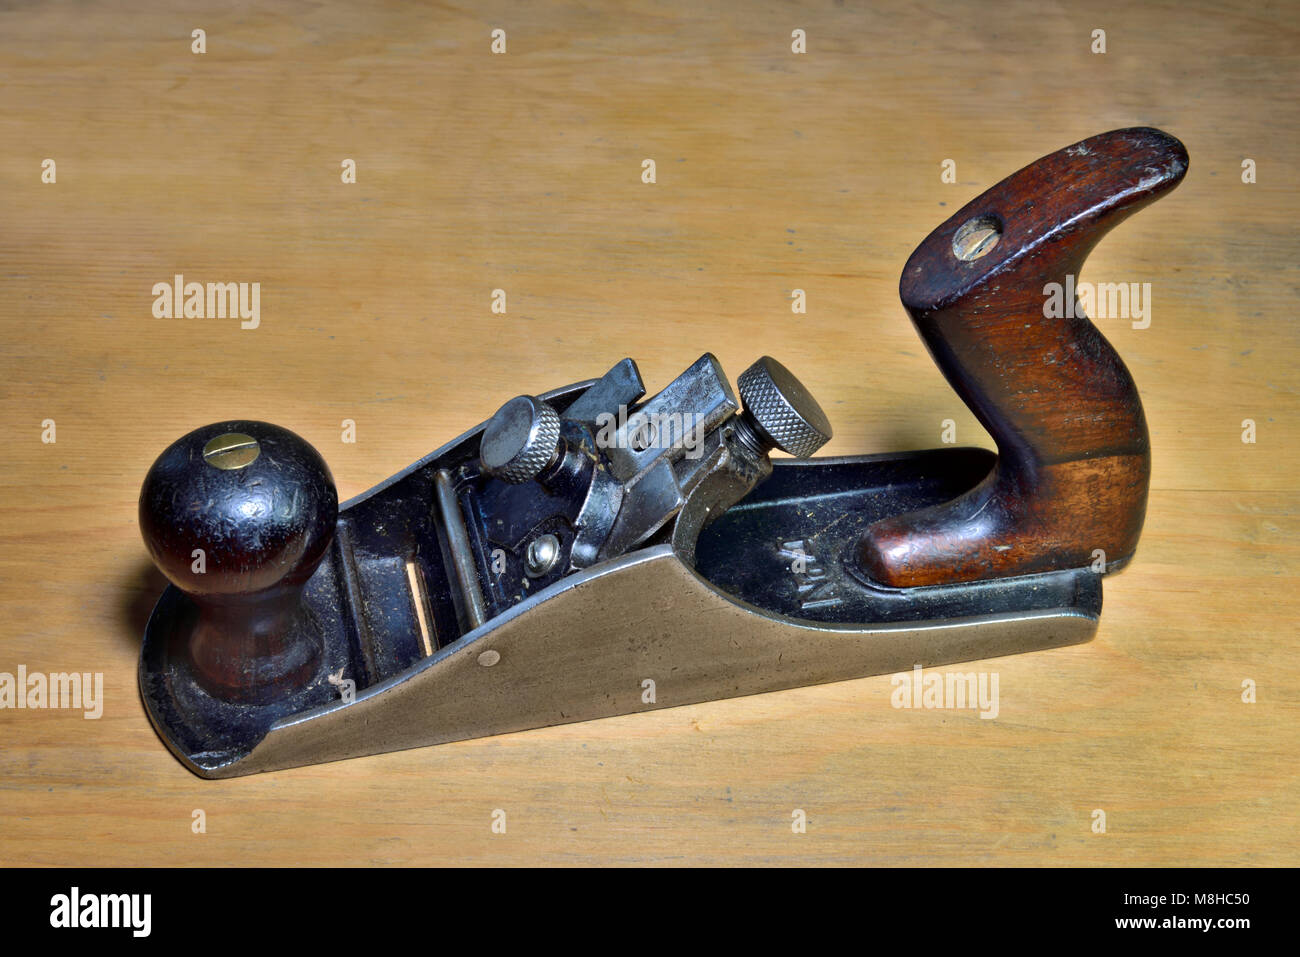 Gage smoothing plane, made by Stanley Company after taking over the Gage Tool company from 1920 to 1941. Gage Self-Setting Wood Plane Stock Photo